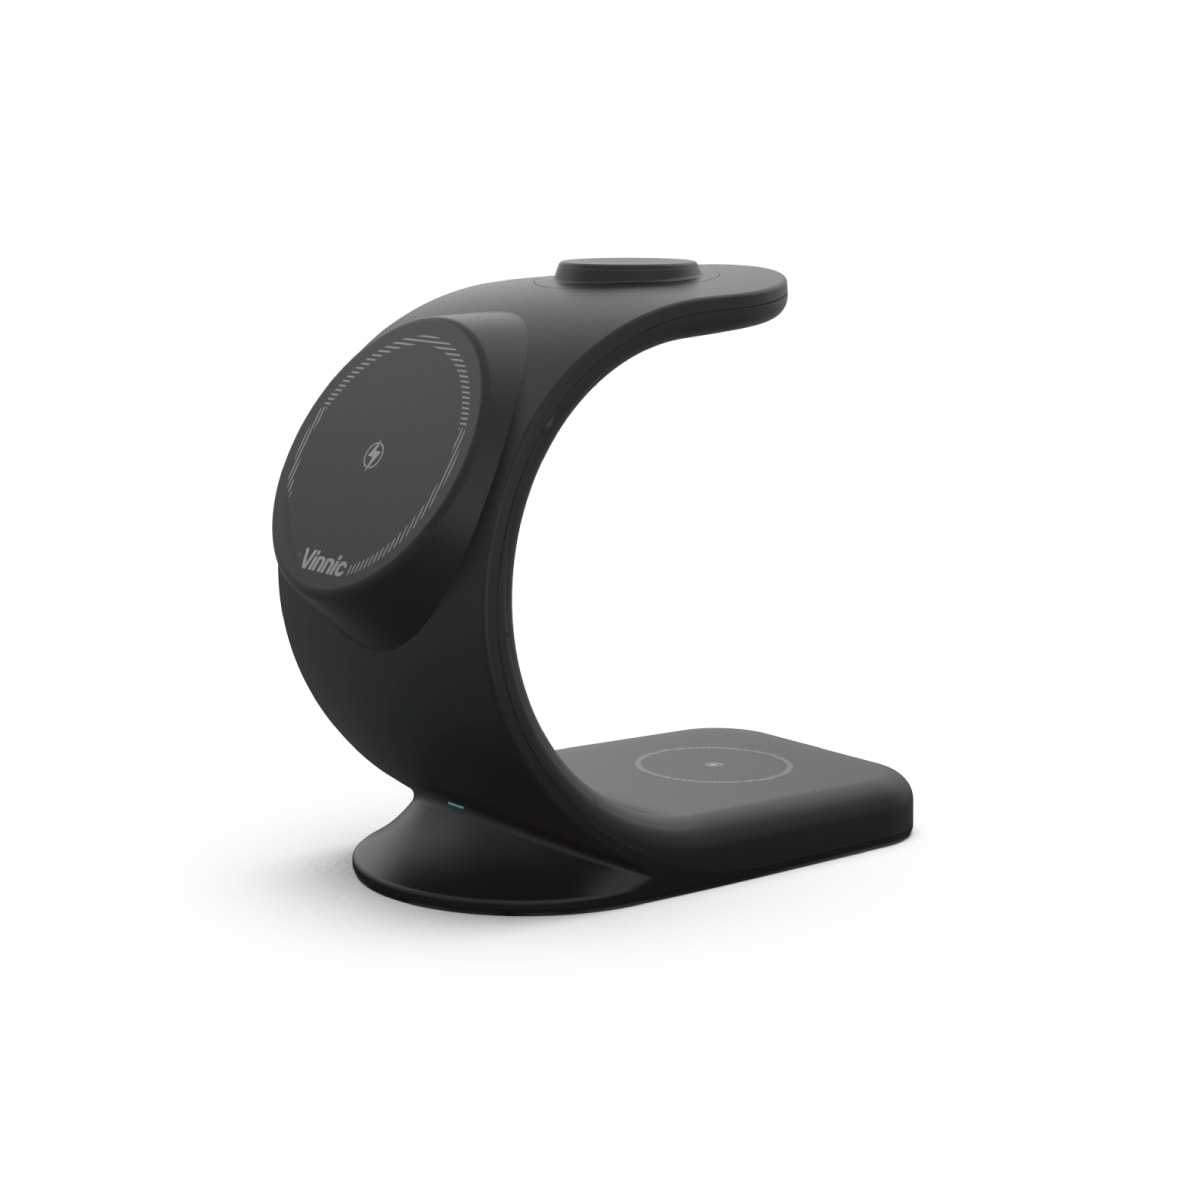 Vinnic Wireless Charger »CHOMO 3-in-1 Magnetic Wireless Charging Dock«